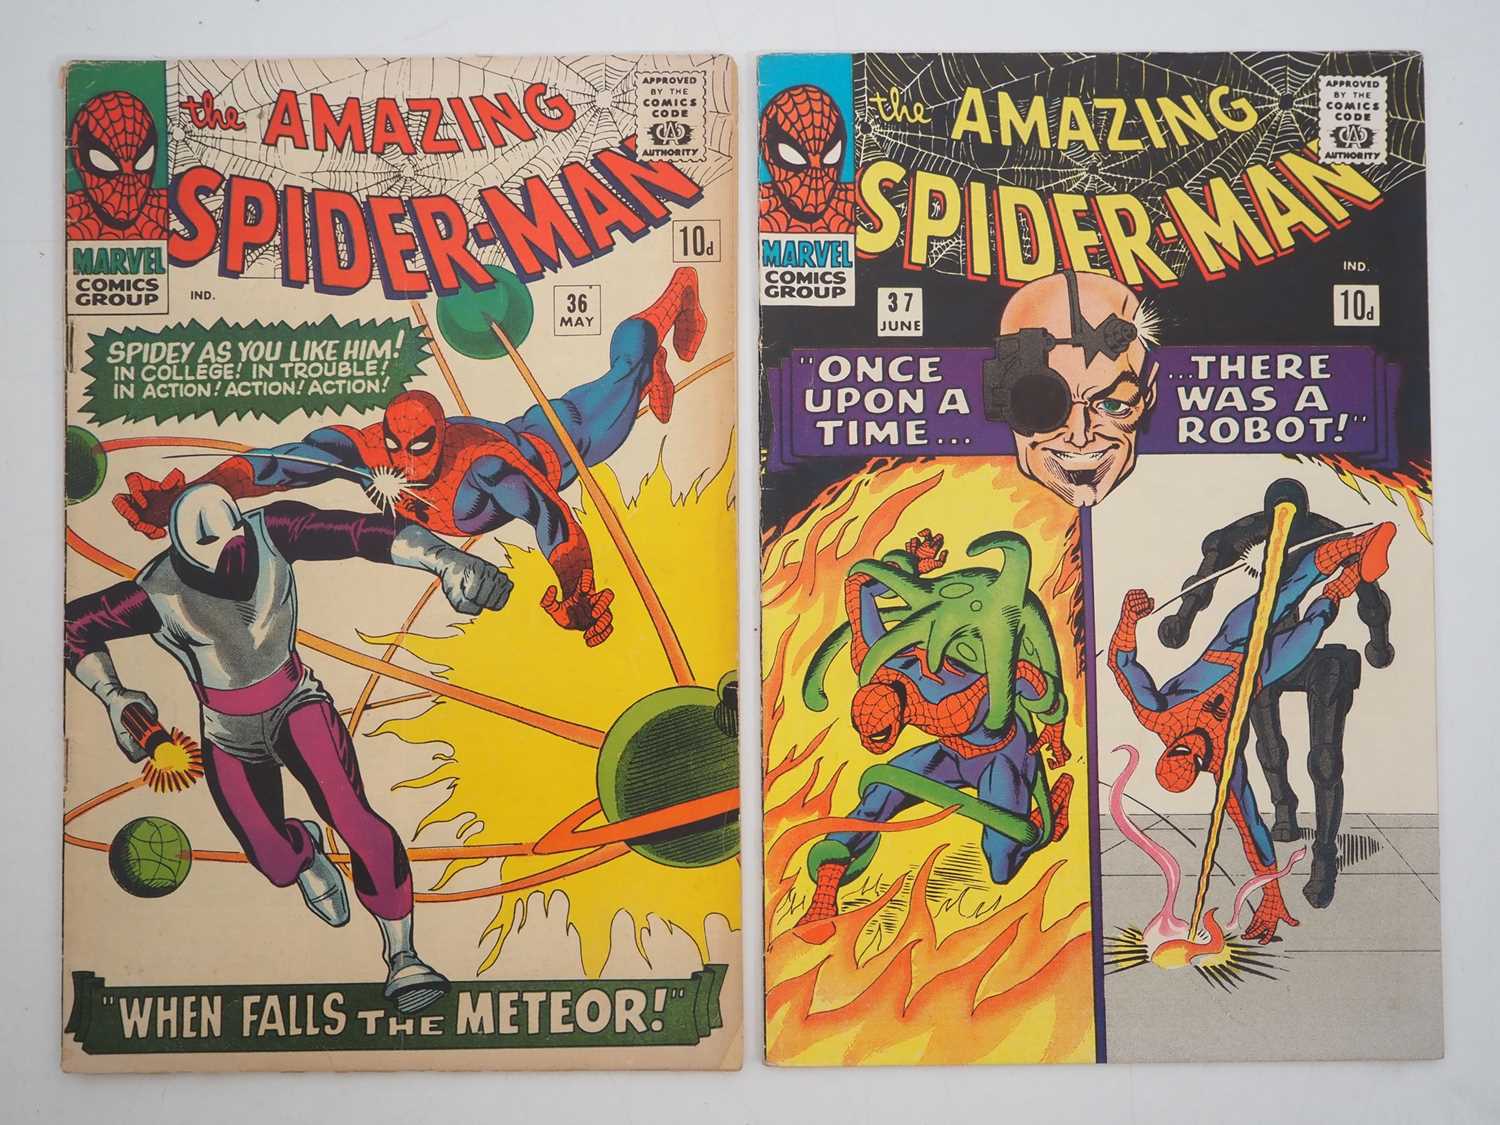 AMAZING SPIDER-MAN #36 & 37 (2 in Lot) - (1966 - MARVEL - UK Price Variant) - Includes the first